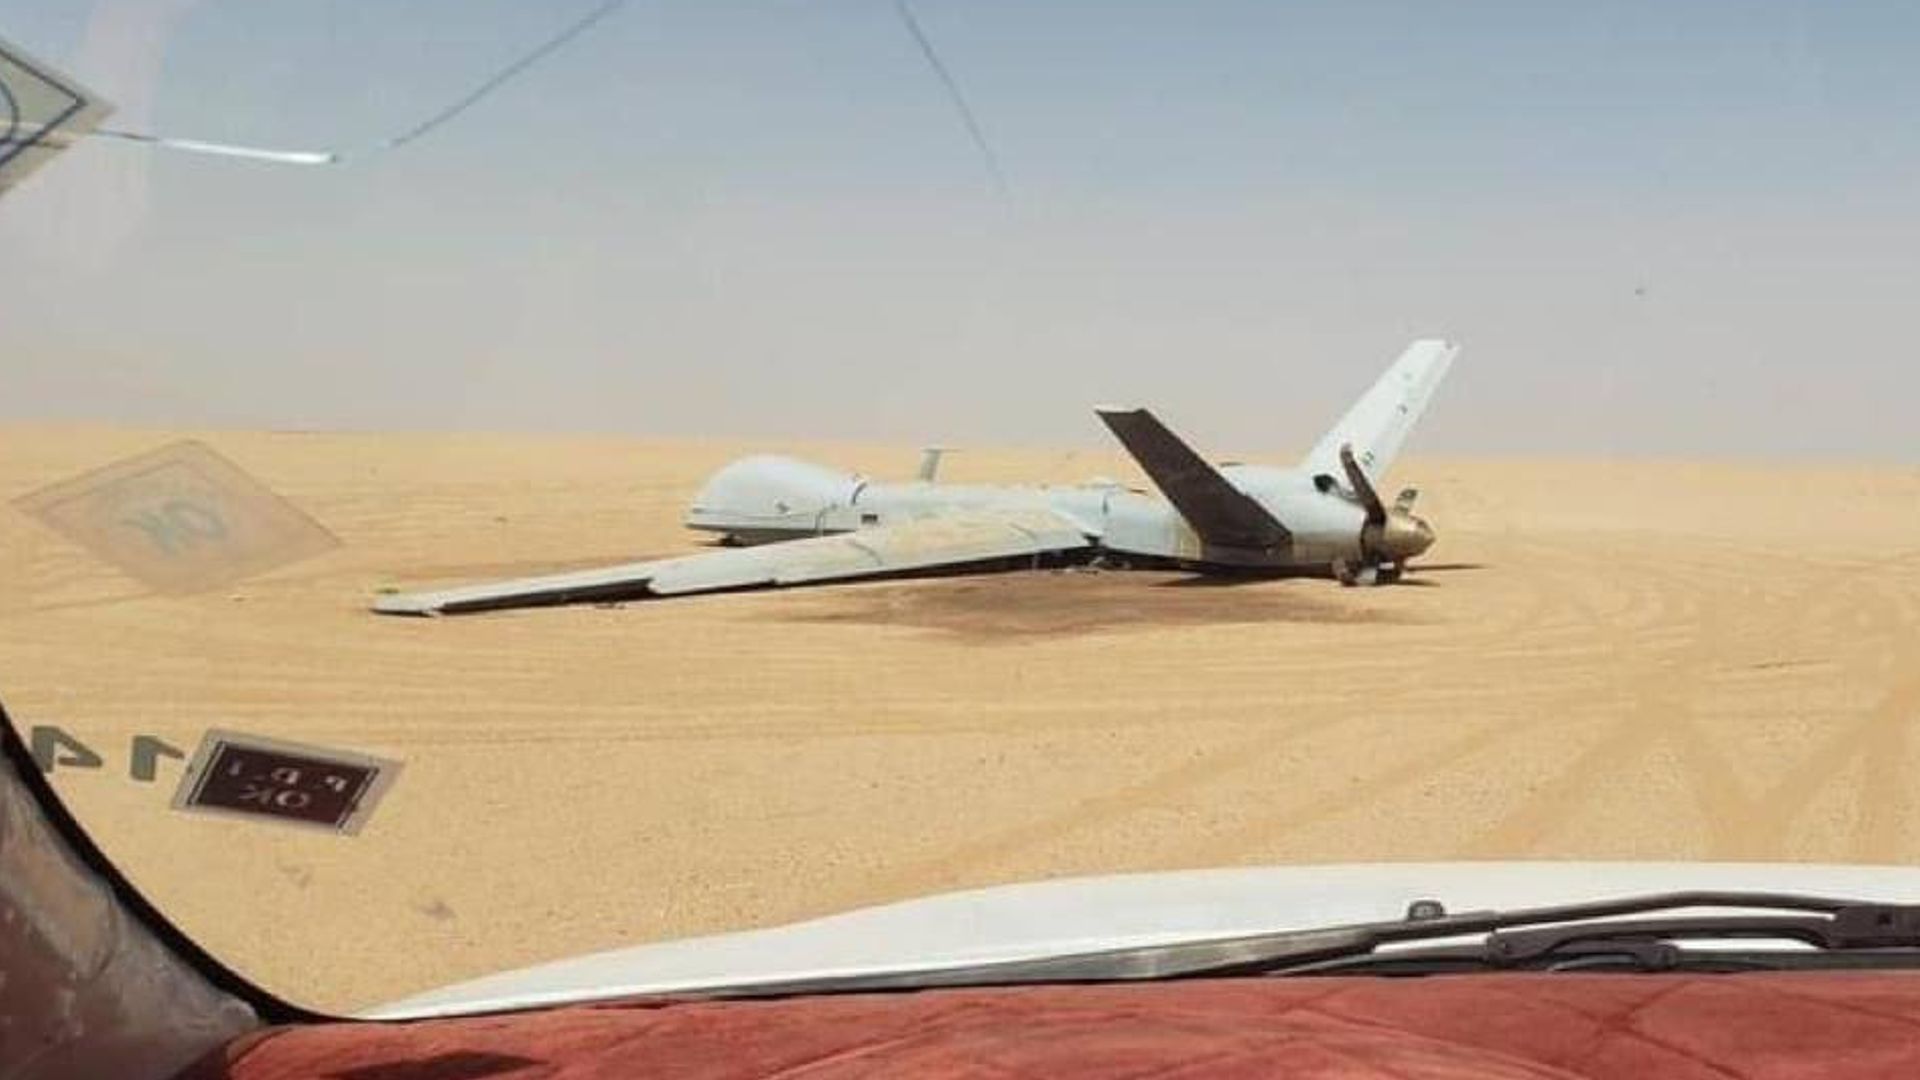 Houthi militants have shot down five U.S. MQ-9 Reapers. The drones are primarily used for ISR, but can carry munitions, like missiles.